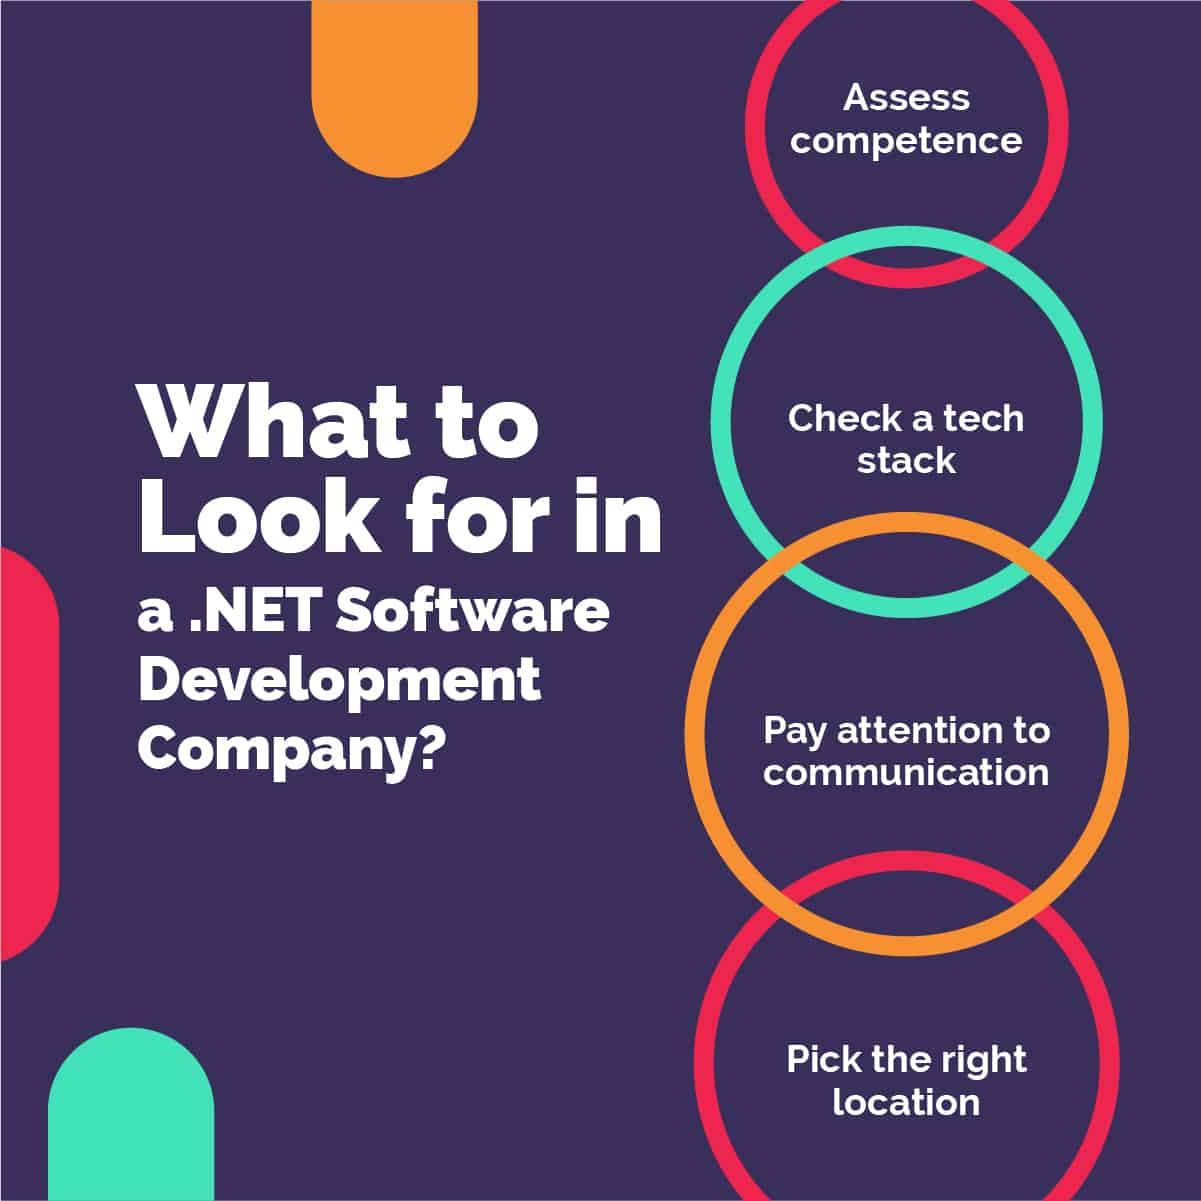 What to Look for in a .NET Software Development Company?